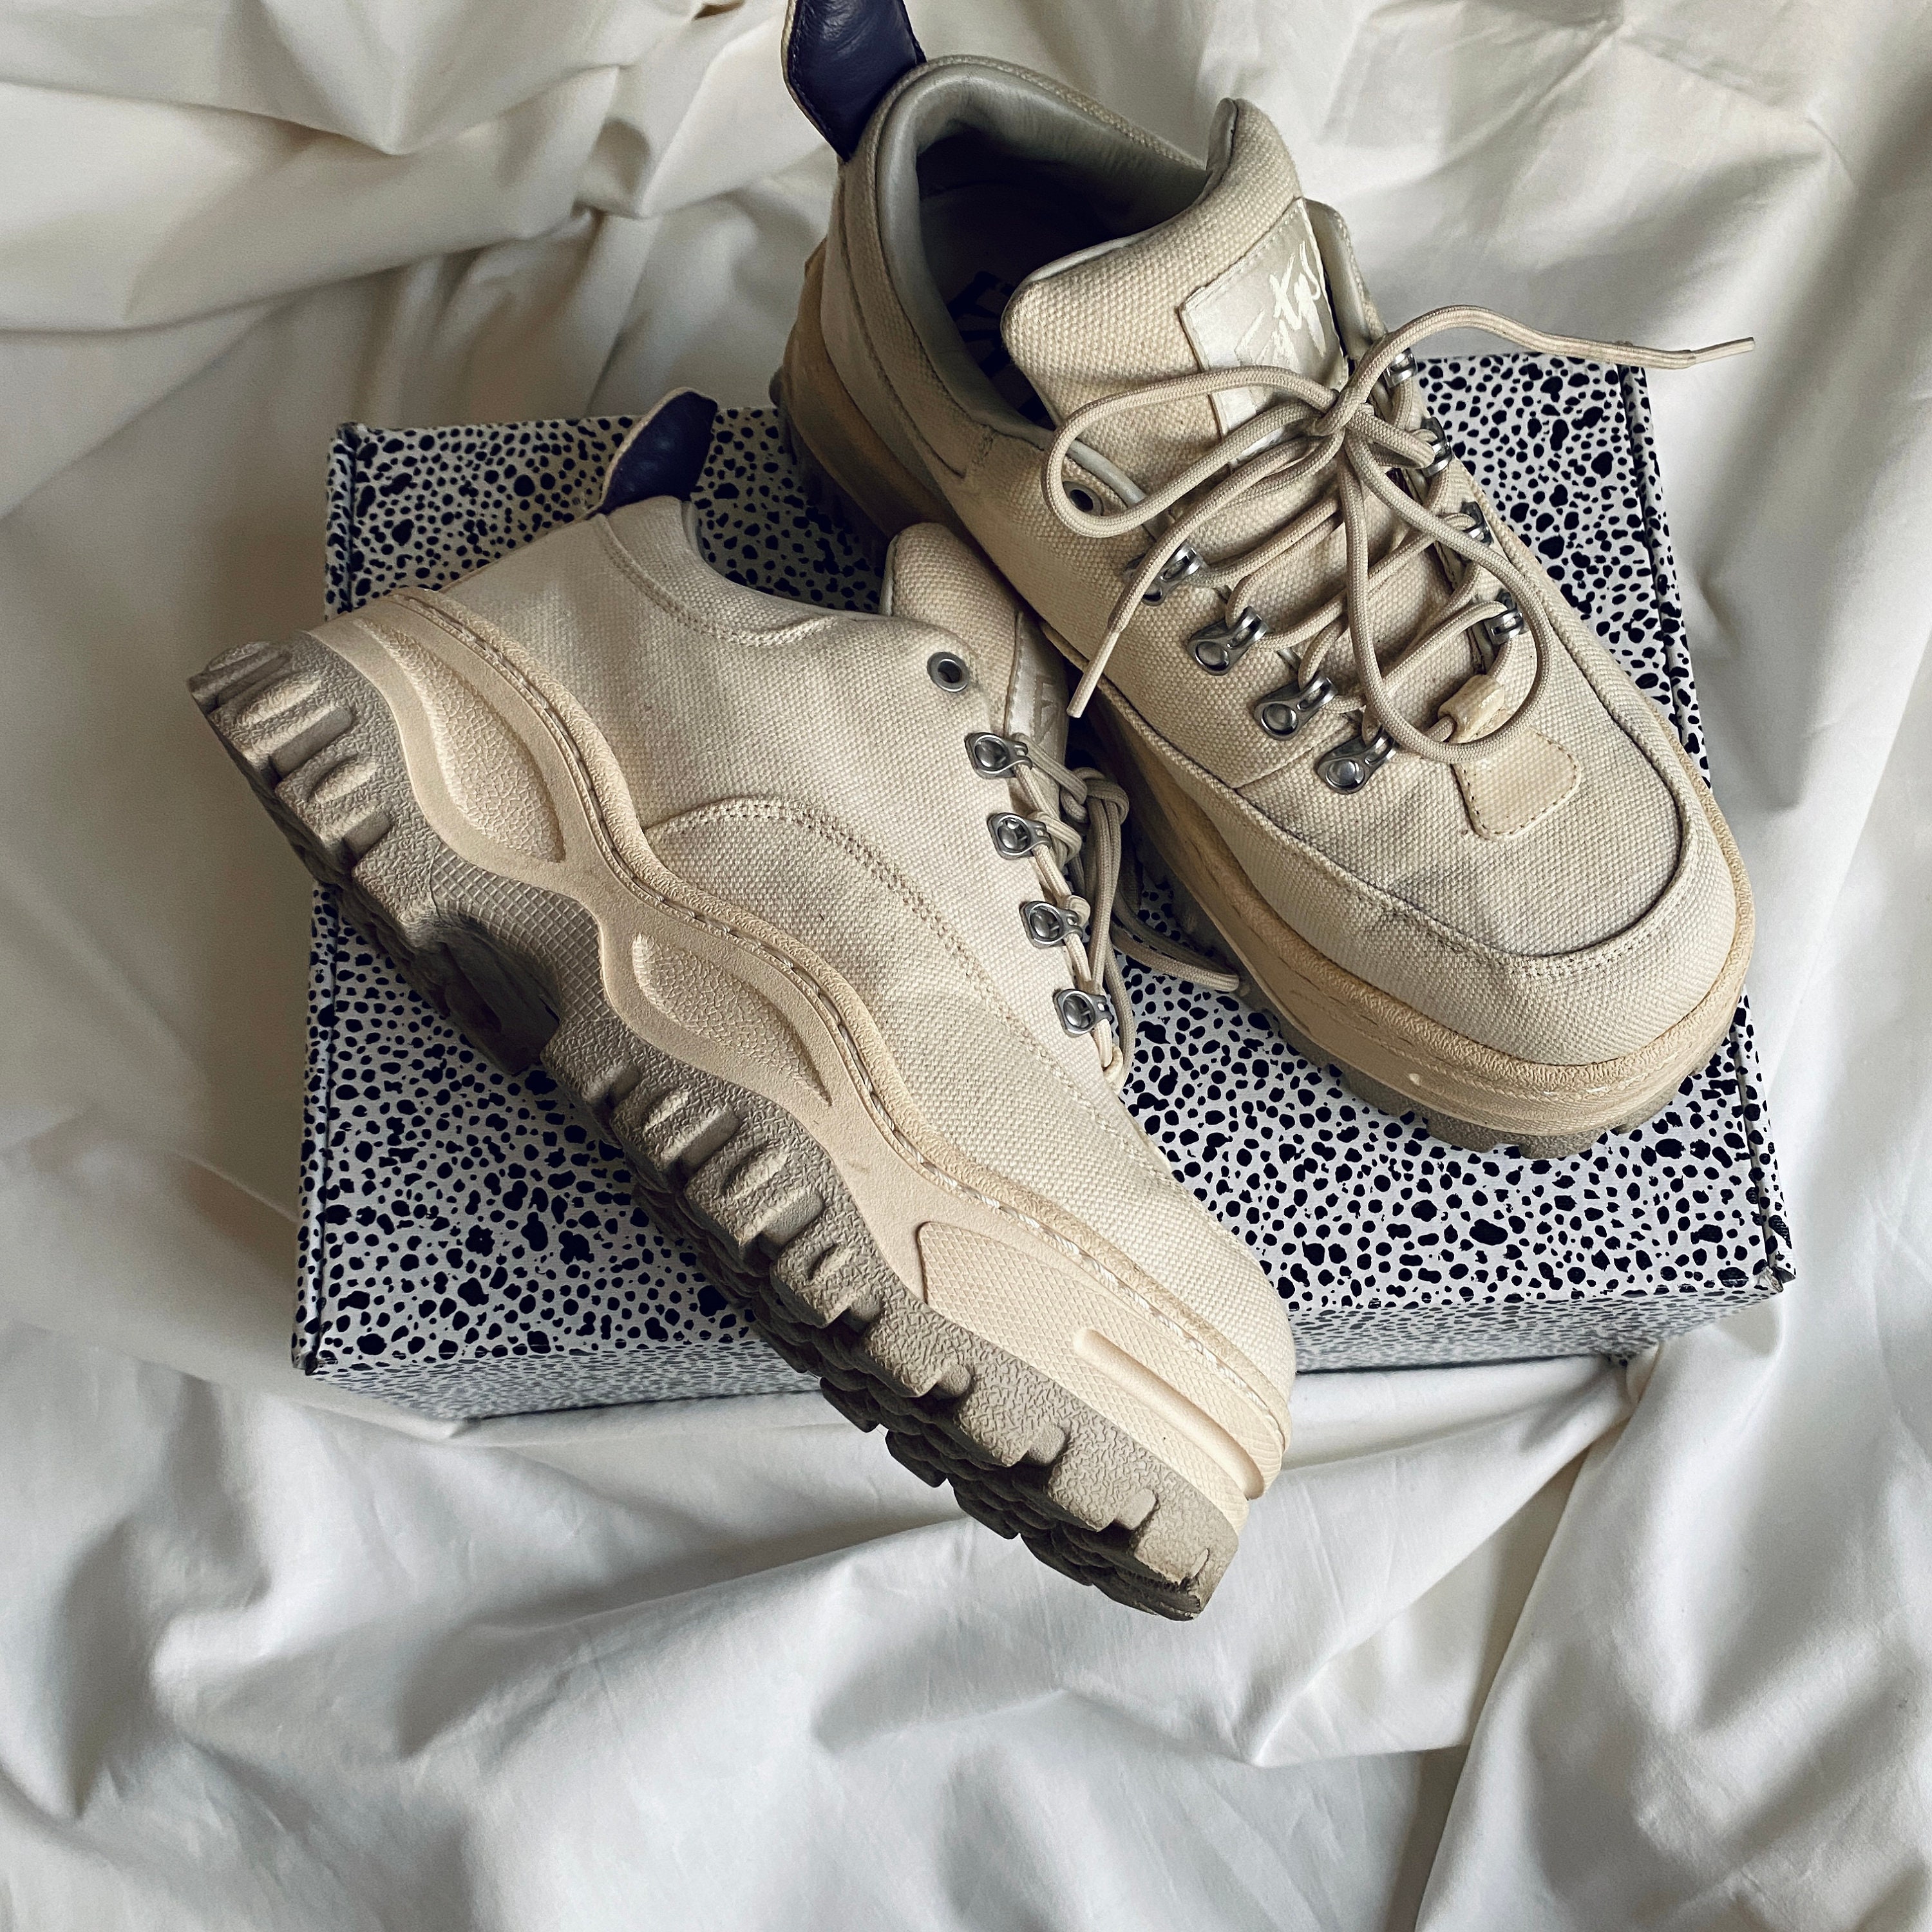 eksplicit Person med ansvar for sportsspil Tentacle EYTYS Chunky Sneakers / Angel Canvas Beige Boots / 90s Trail - Etsy